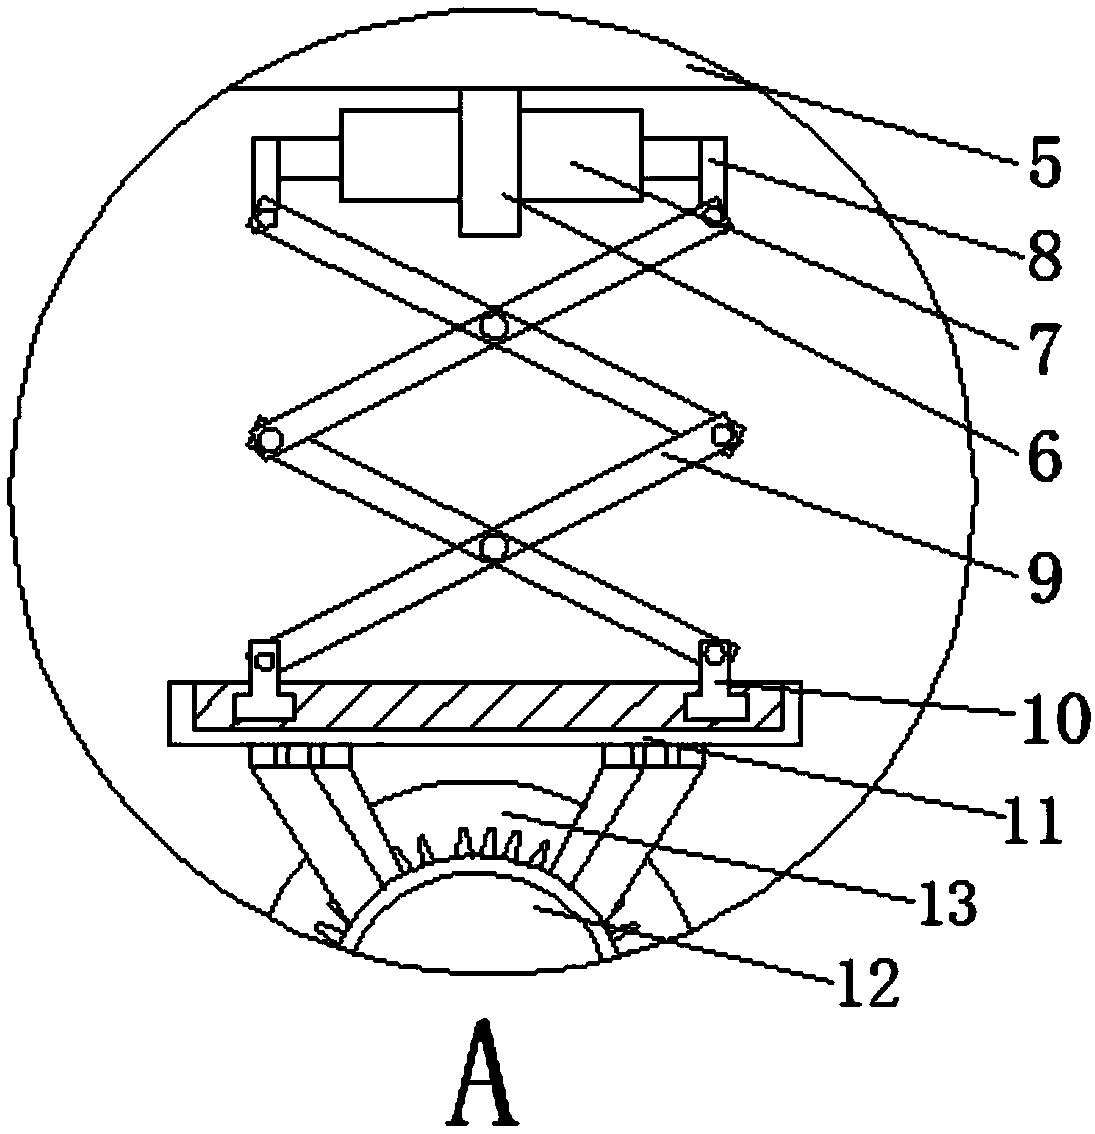 Woven-bag cutting device